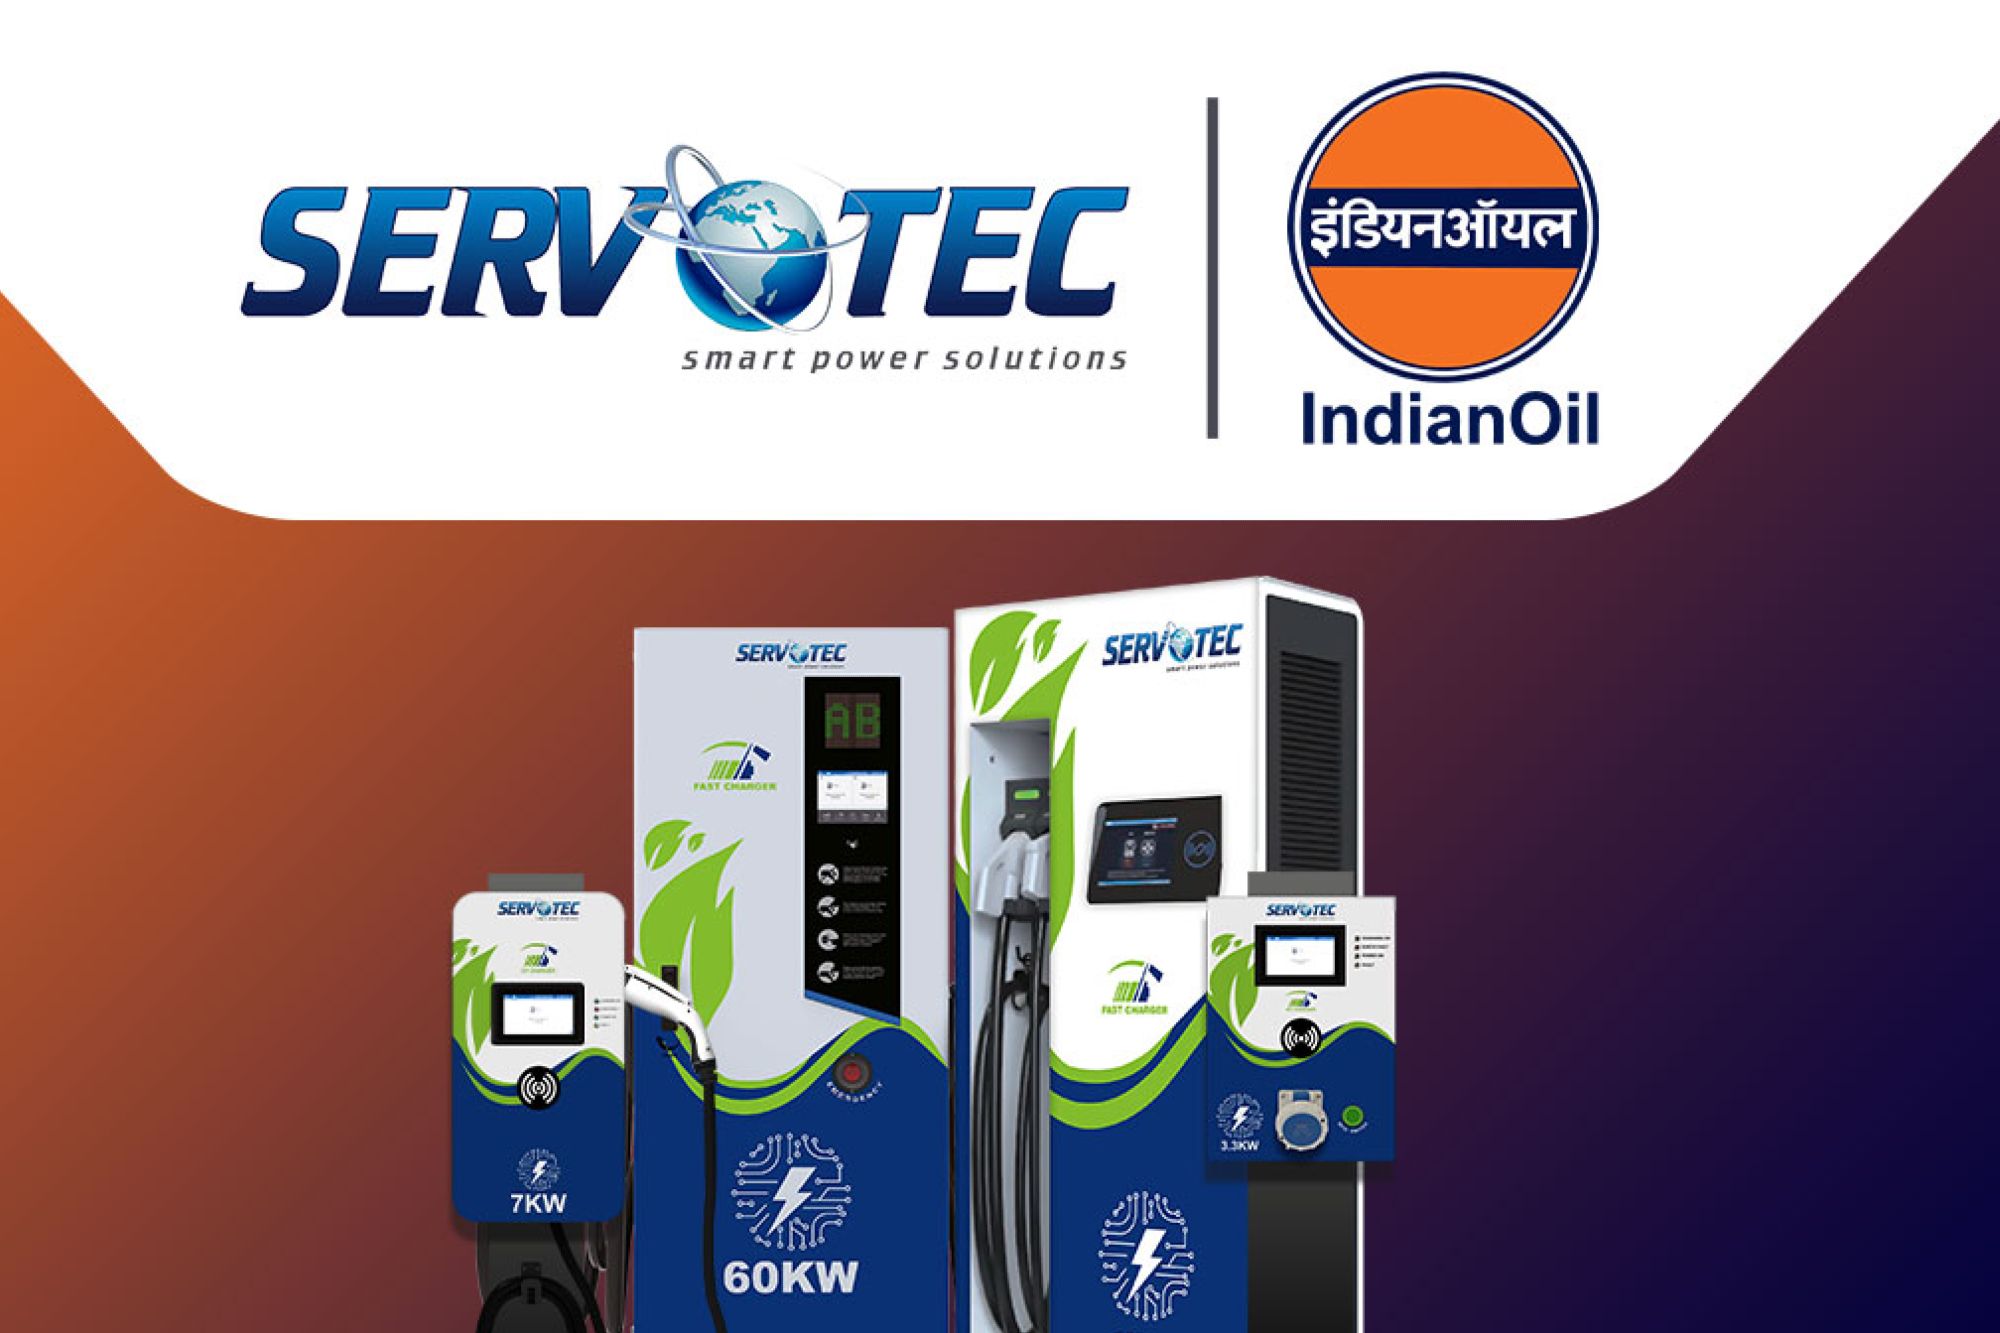 Servotech power systems secures major orders for EV chargers, fuels India’s E-Mobility revolution